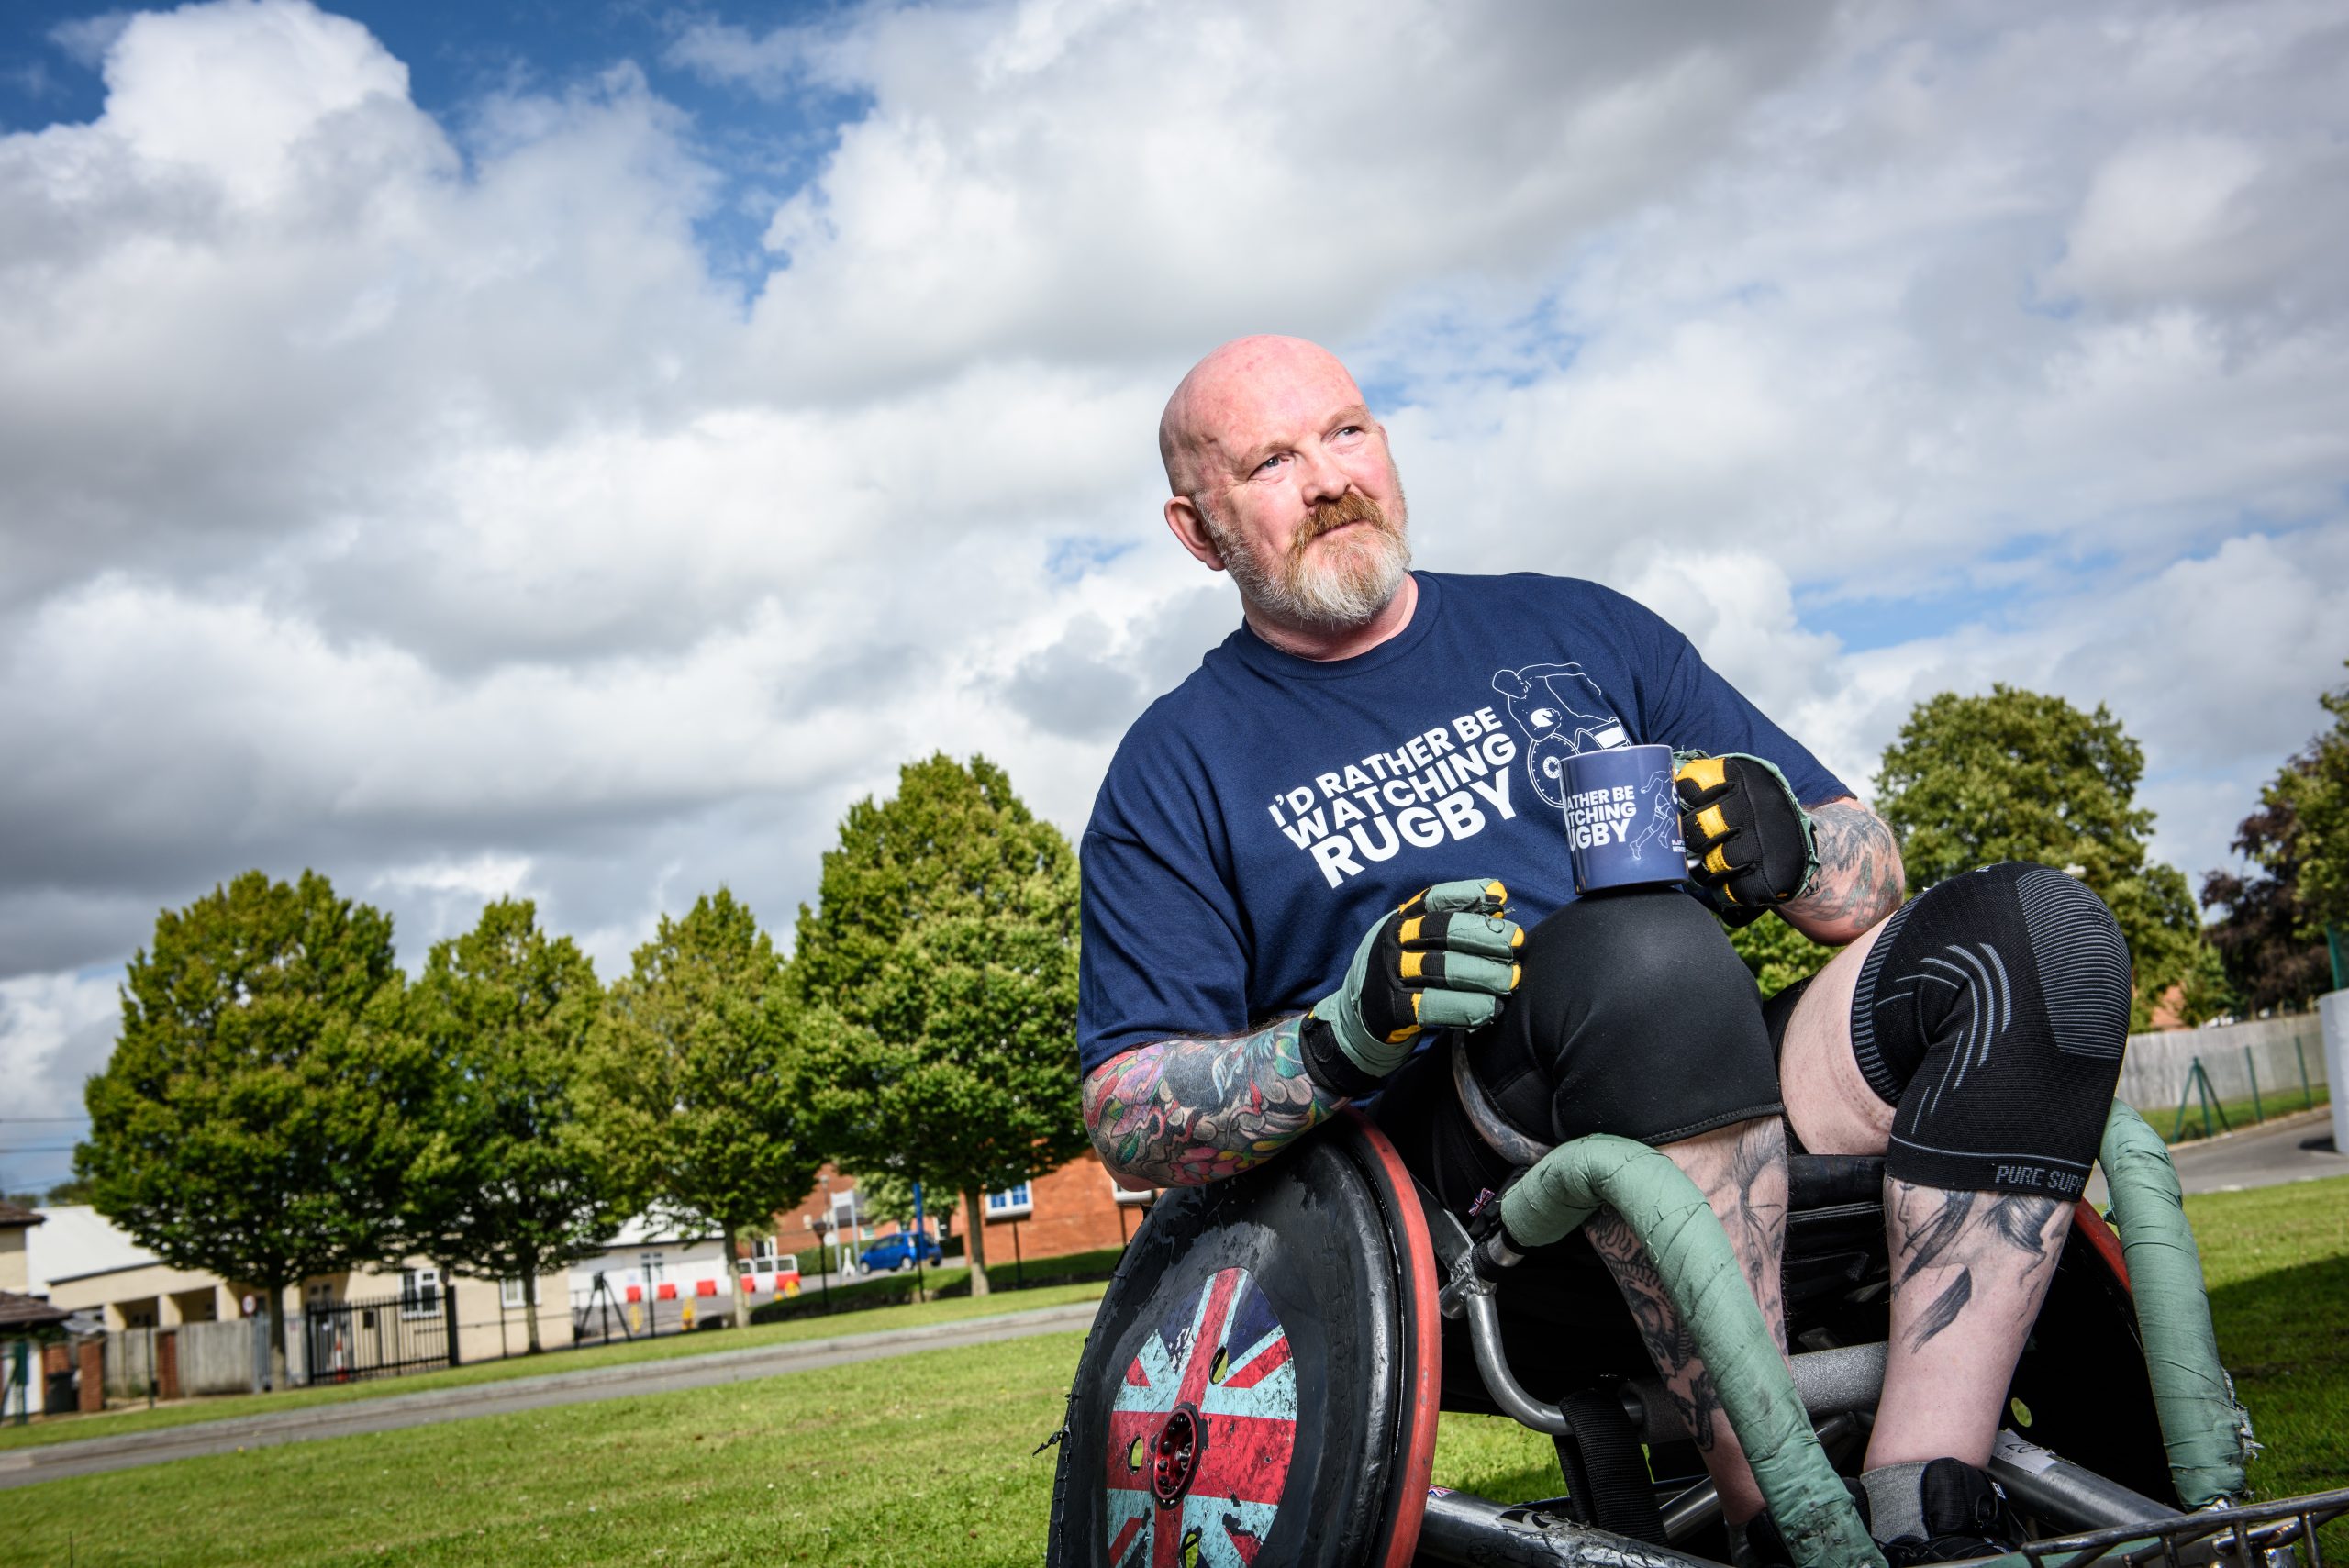 Charity’s Wheelchair Rugby Team Gives Veteran ‘New Outlook On Life’